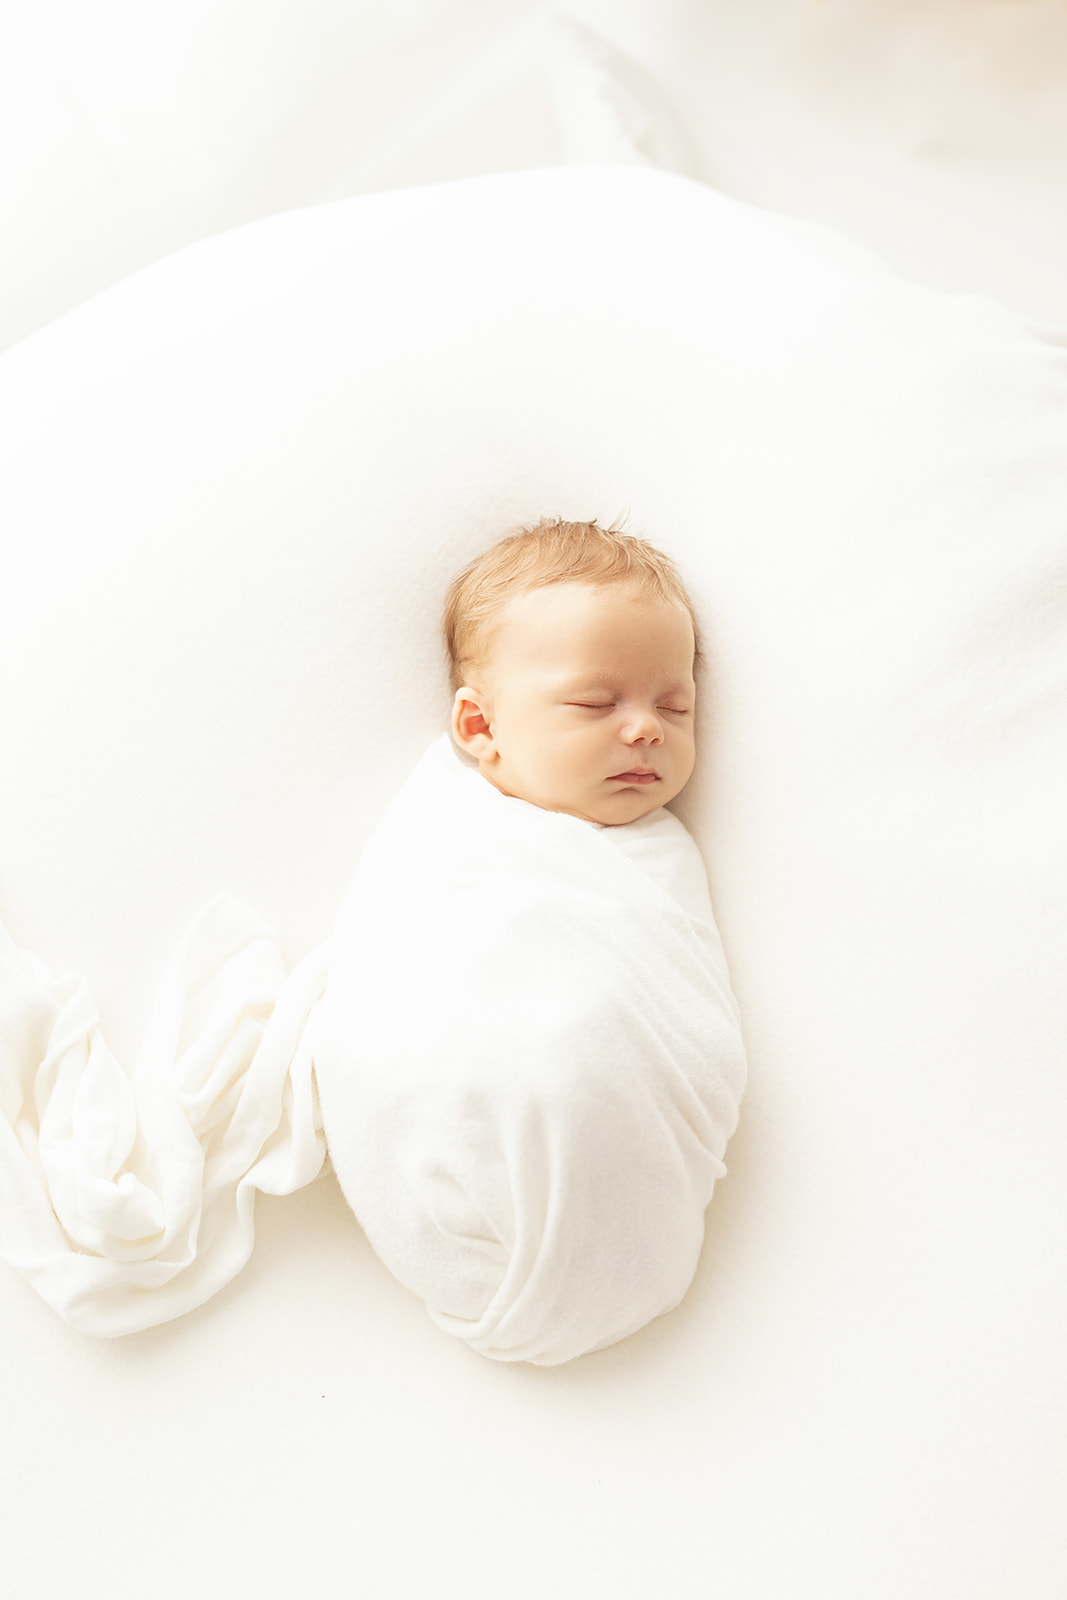 A newborn baby sleeps in a white swaddle in a studio